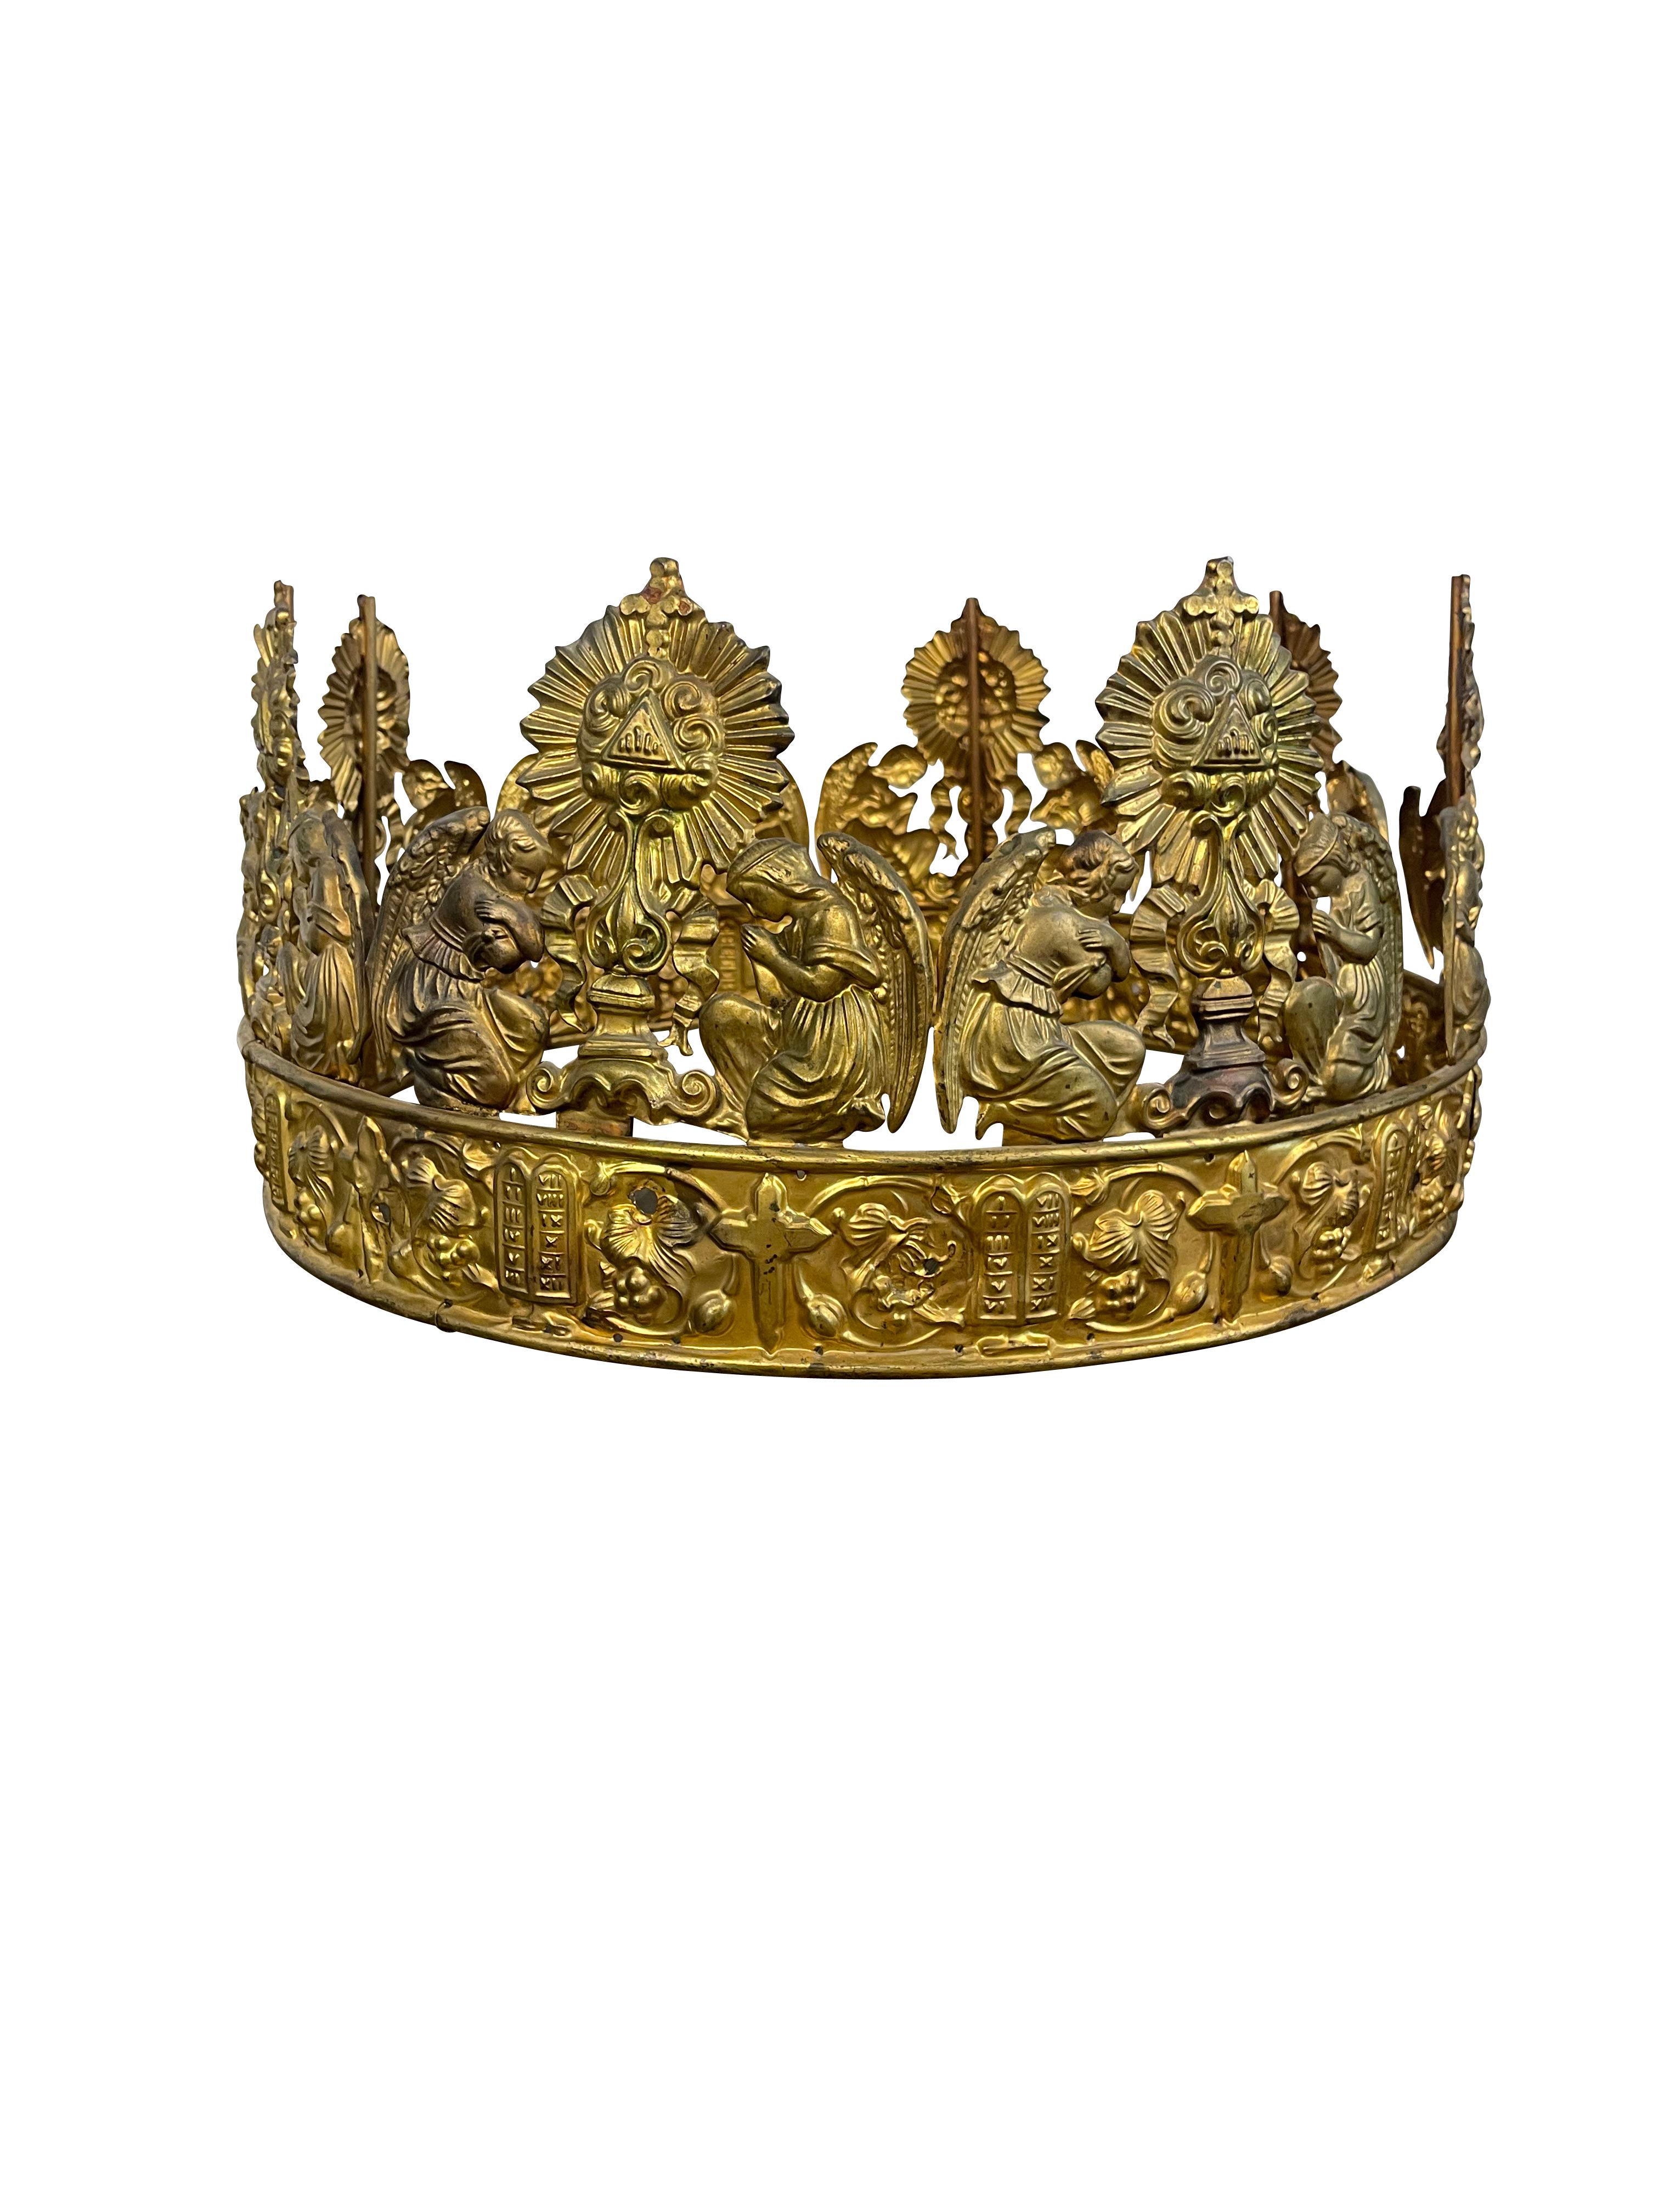 19th Century French baptismal crown. It is an unusually large size—some pitting to the metal but a beautiful gilt patina.  The possibilities are endless for decoration as a child's bed crown with tulle or in an adult bedroom with fabulous fabric. 